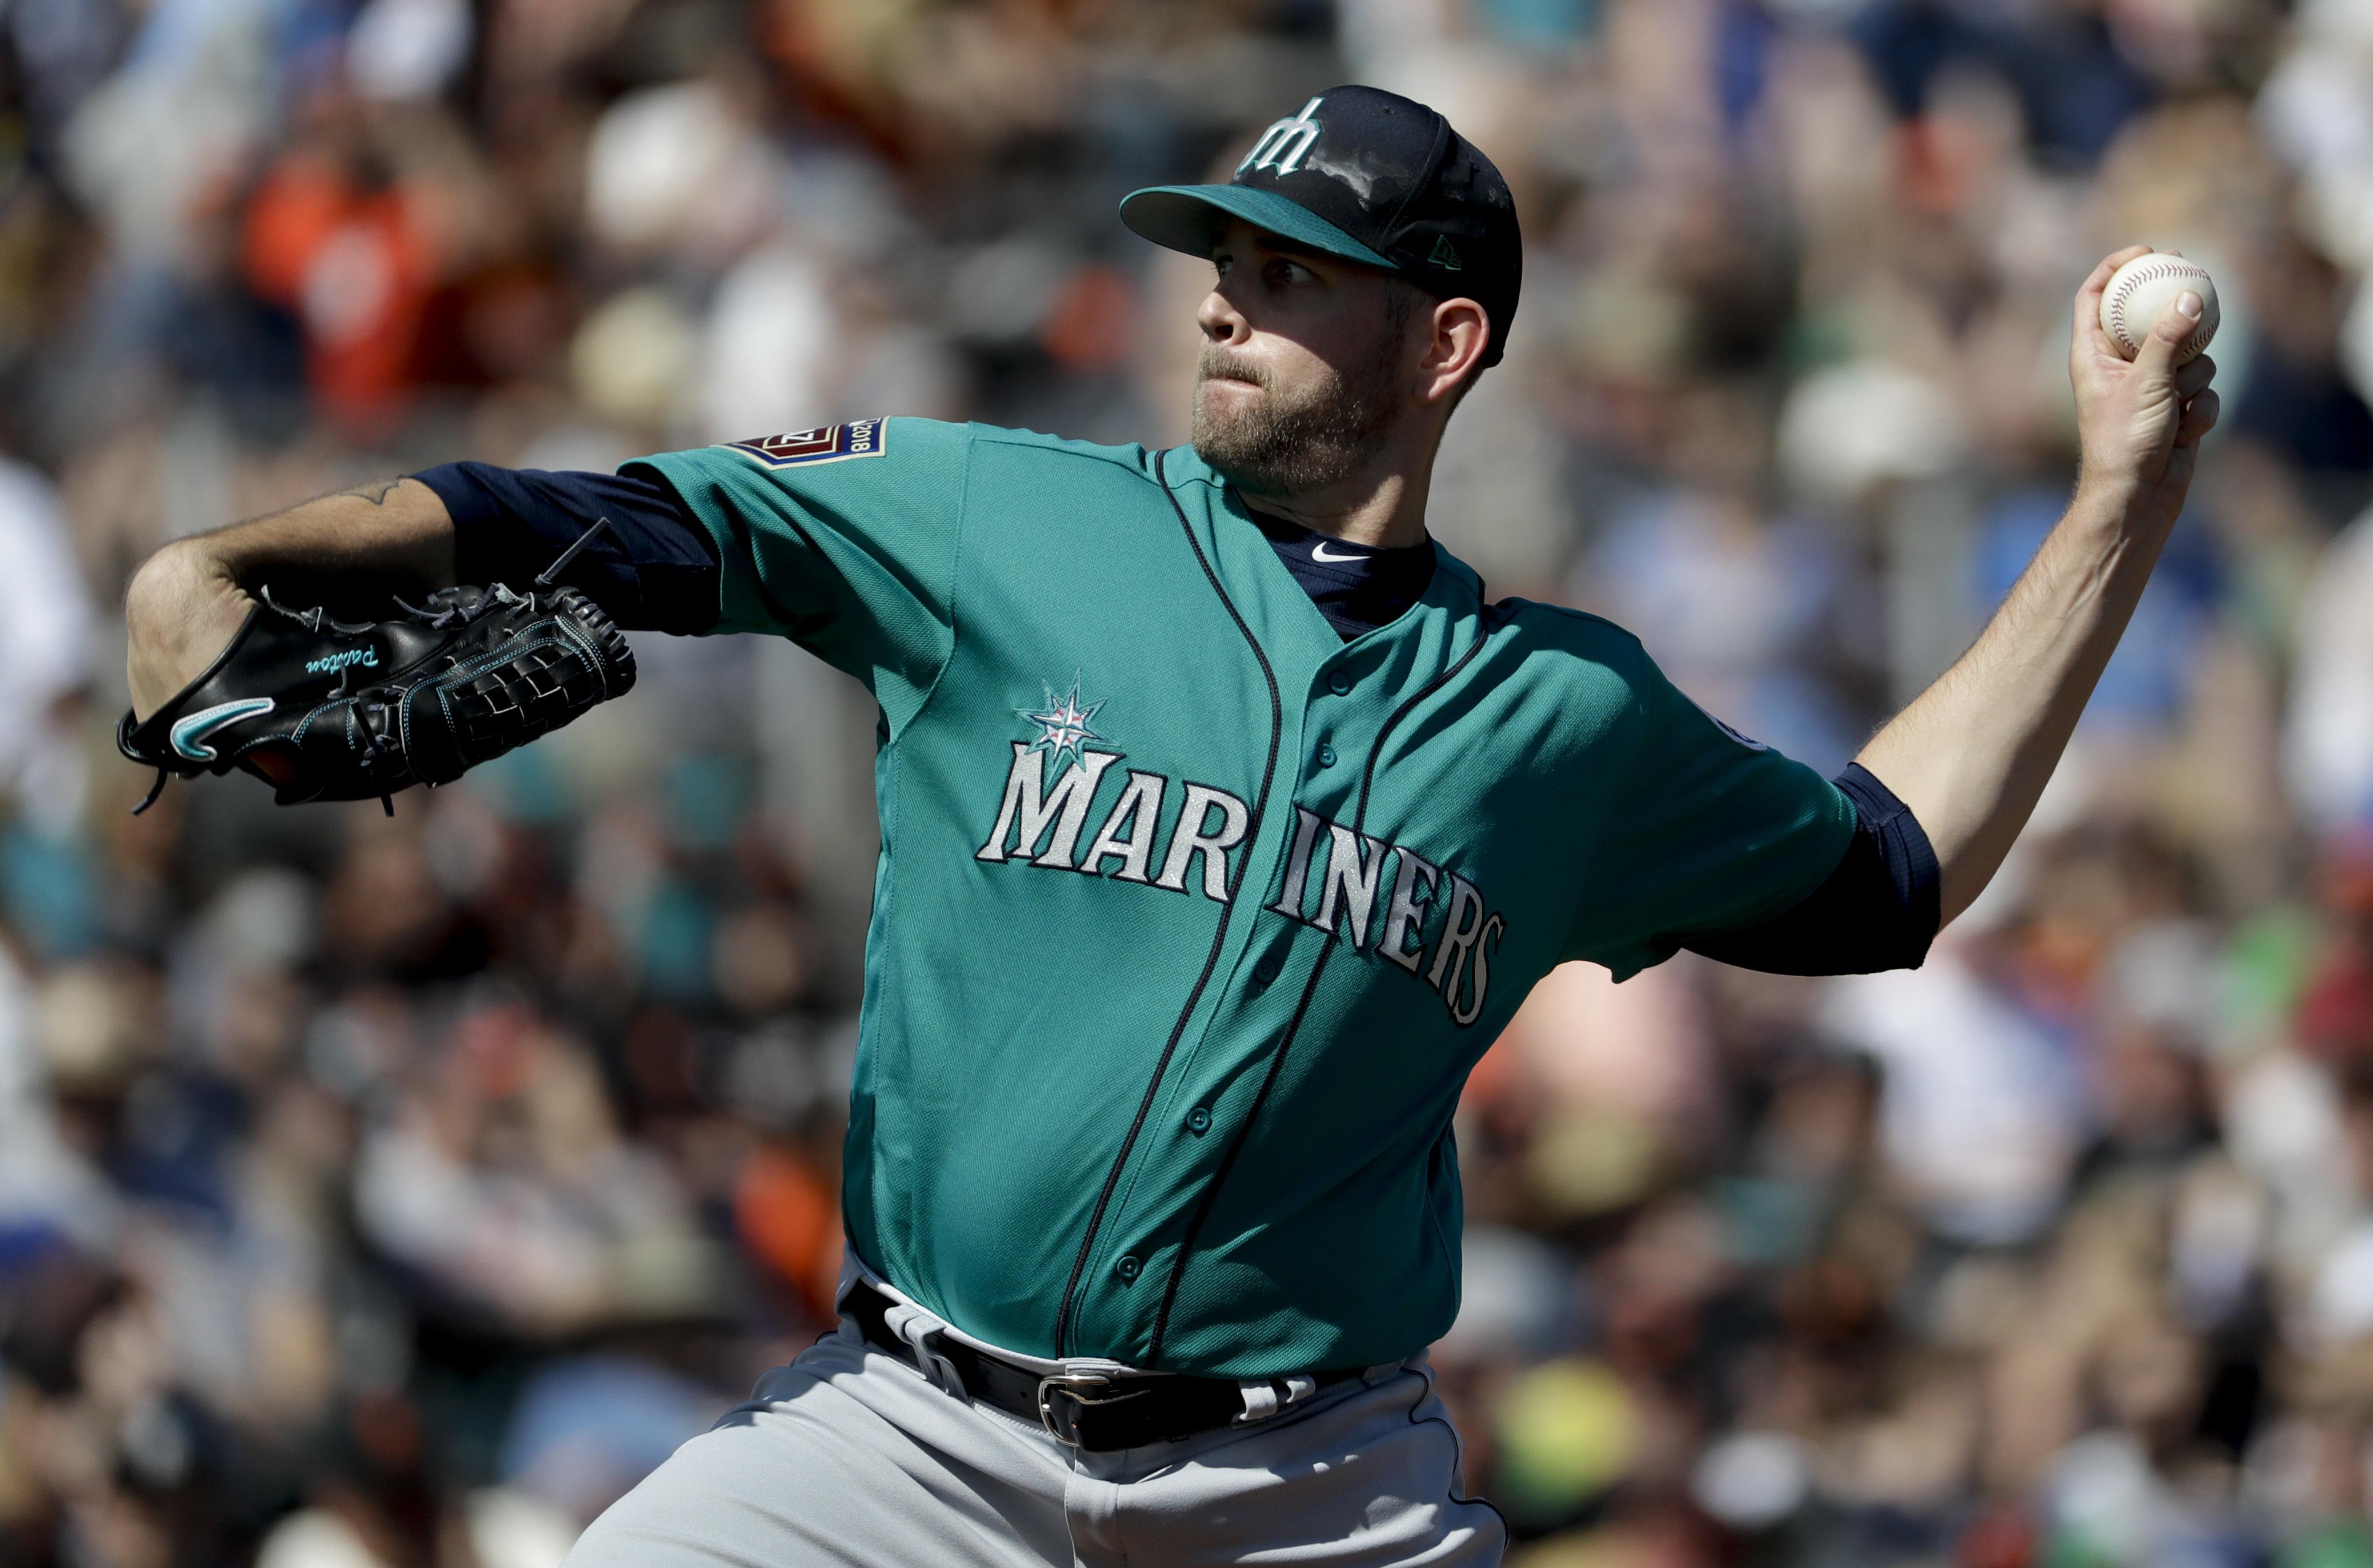 Pitching staff will likely determine the success of Mariners’ season